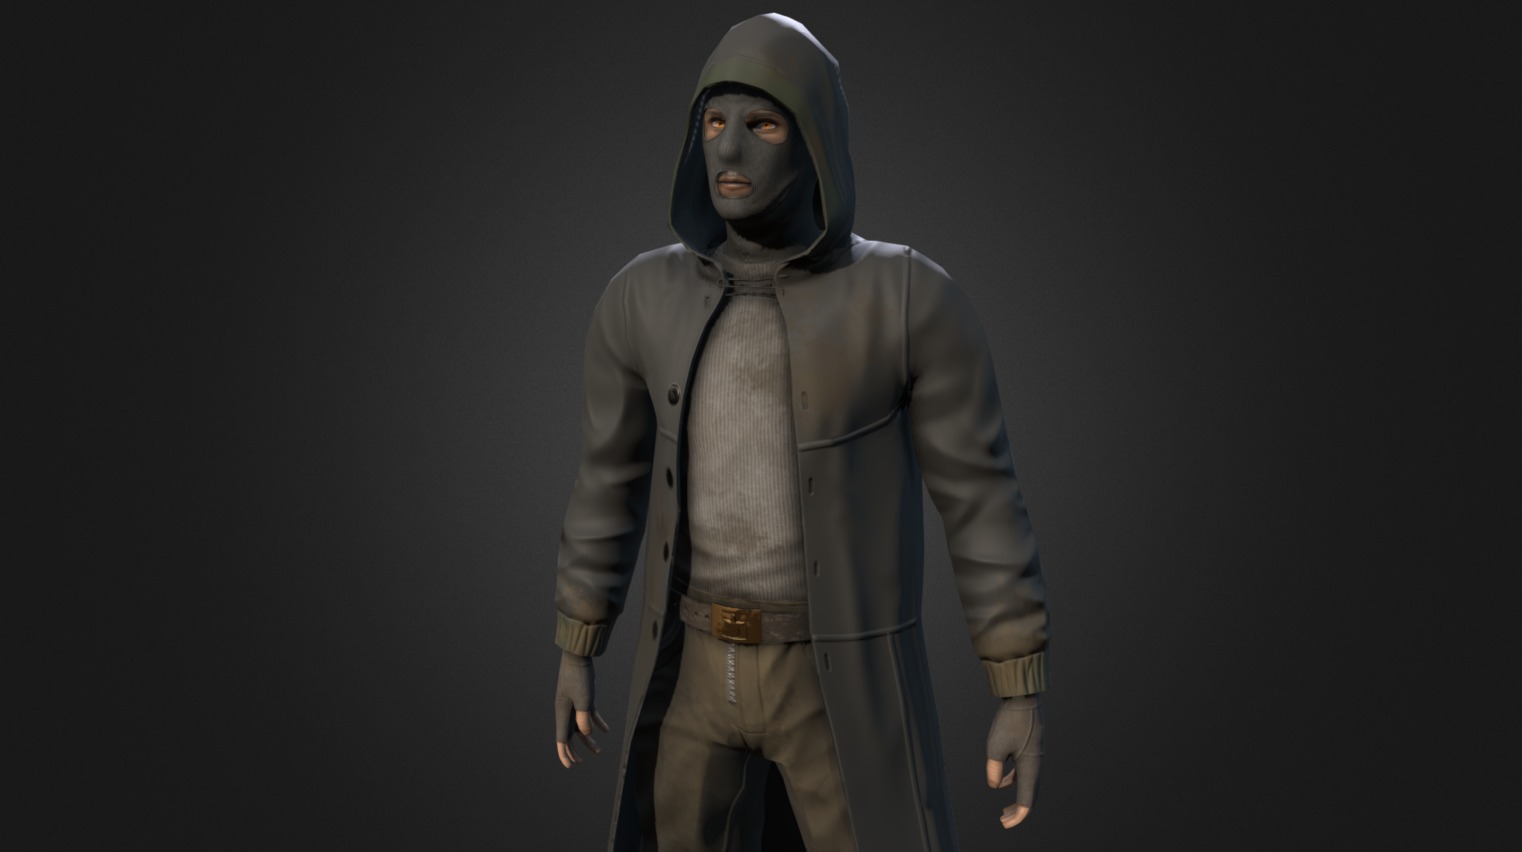 Made a character based on one of my favorite game series. Went for a relatively low poly model, and tried to do a lot with the textures. Had some trouble with the UV's and baking, but turned out well. Spent a good amount of time practicing sculpting fabrics.

2K PBR textures - S.T.A.L.K.E.R.-Inspired Game Character - 3D model by Michael Makivic (@makivic) 3d model